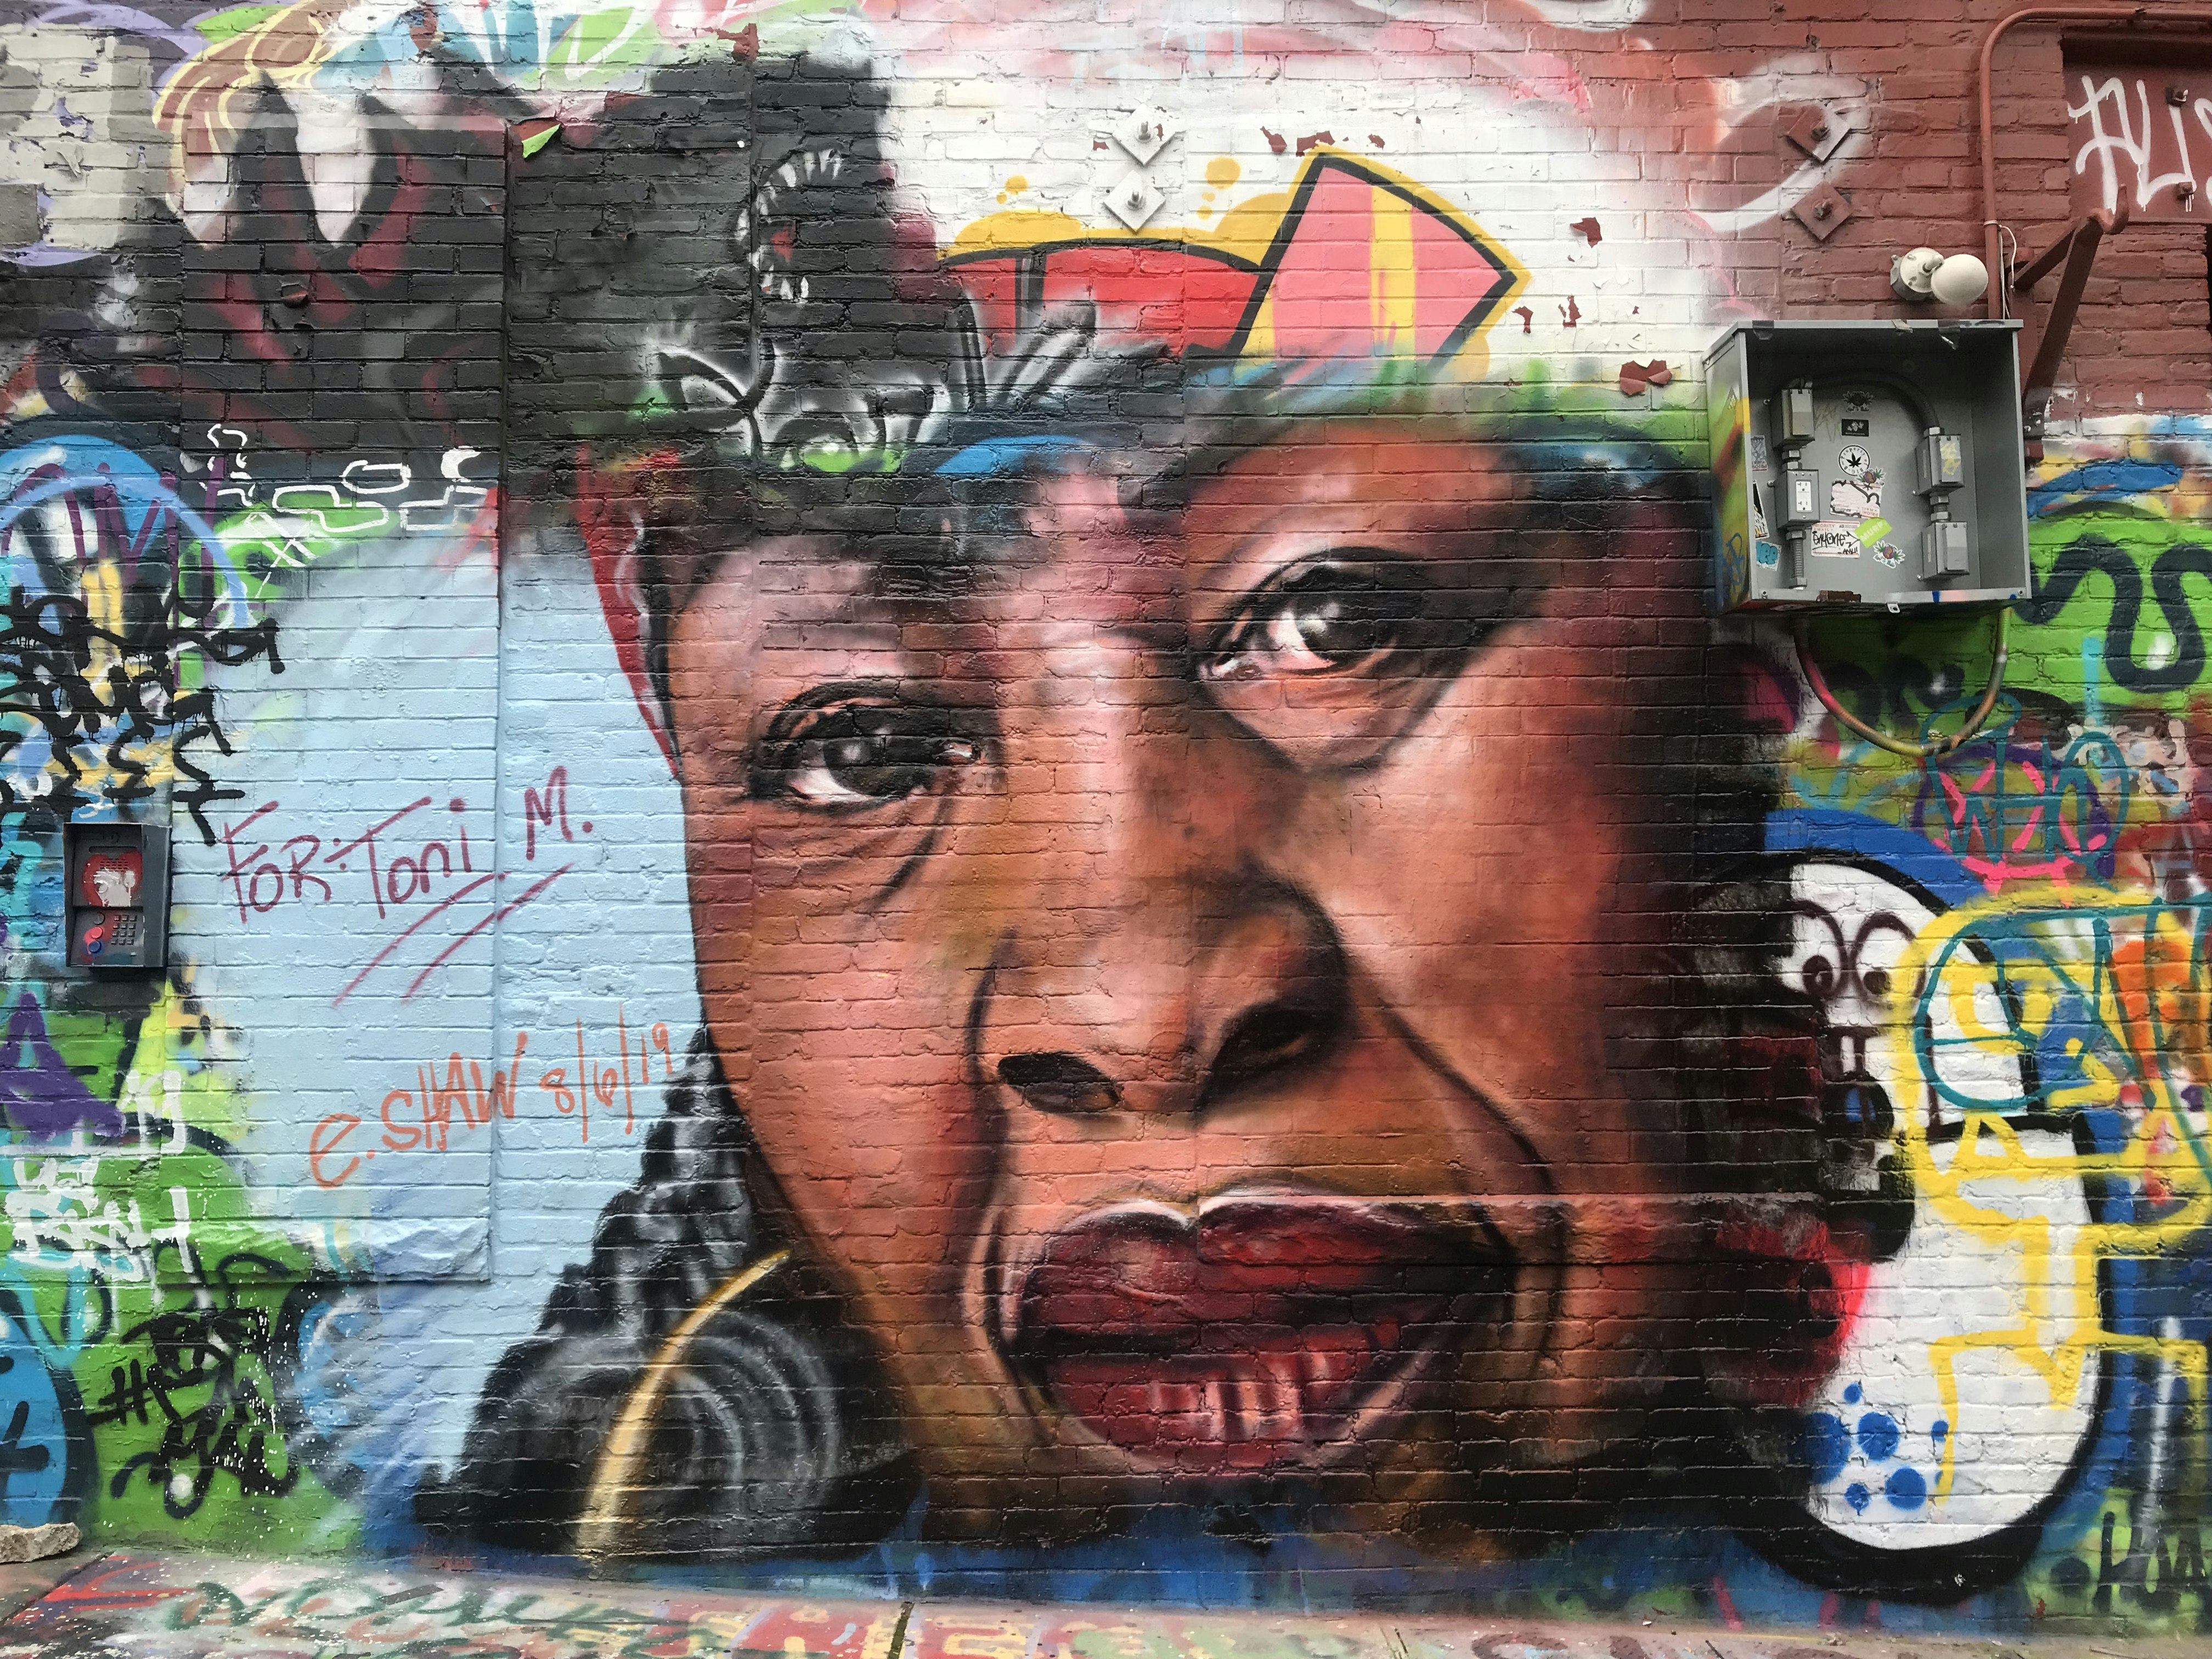 A colourful spray-painted mural of Toni Morrison